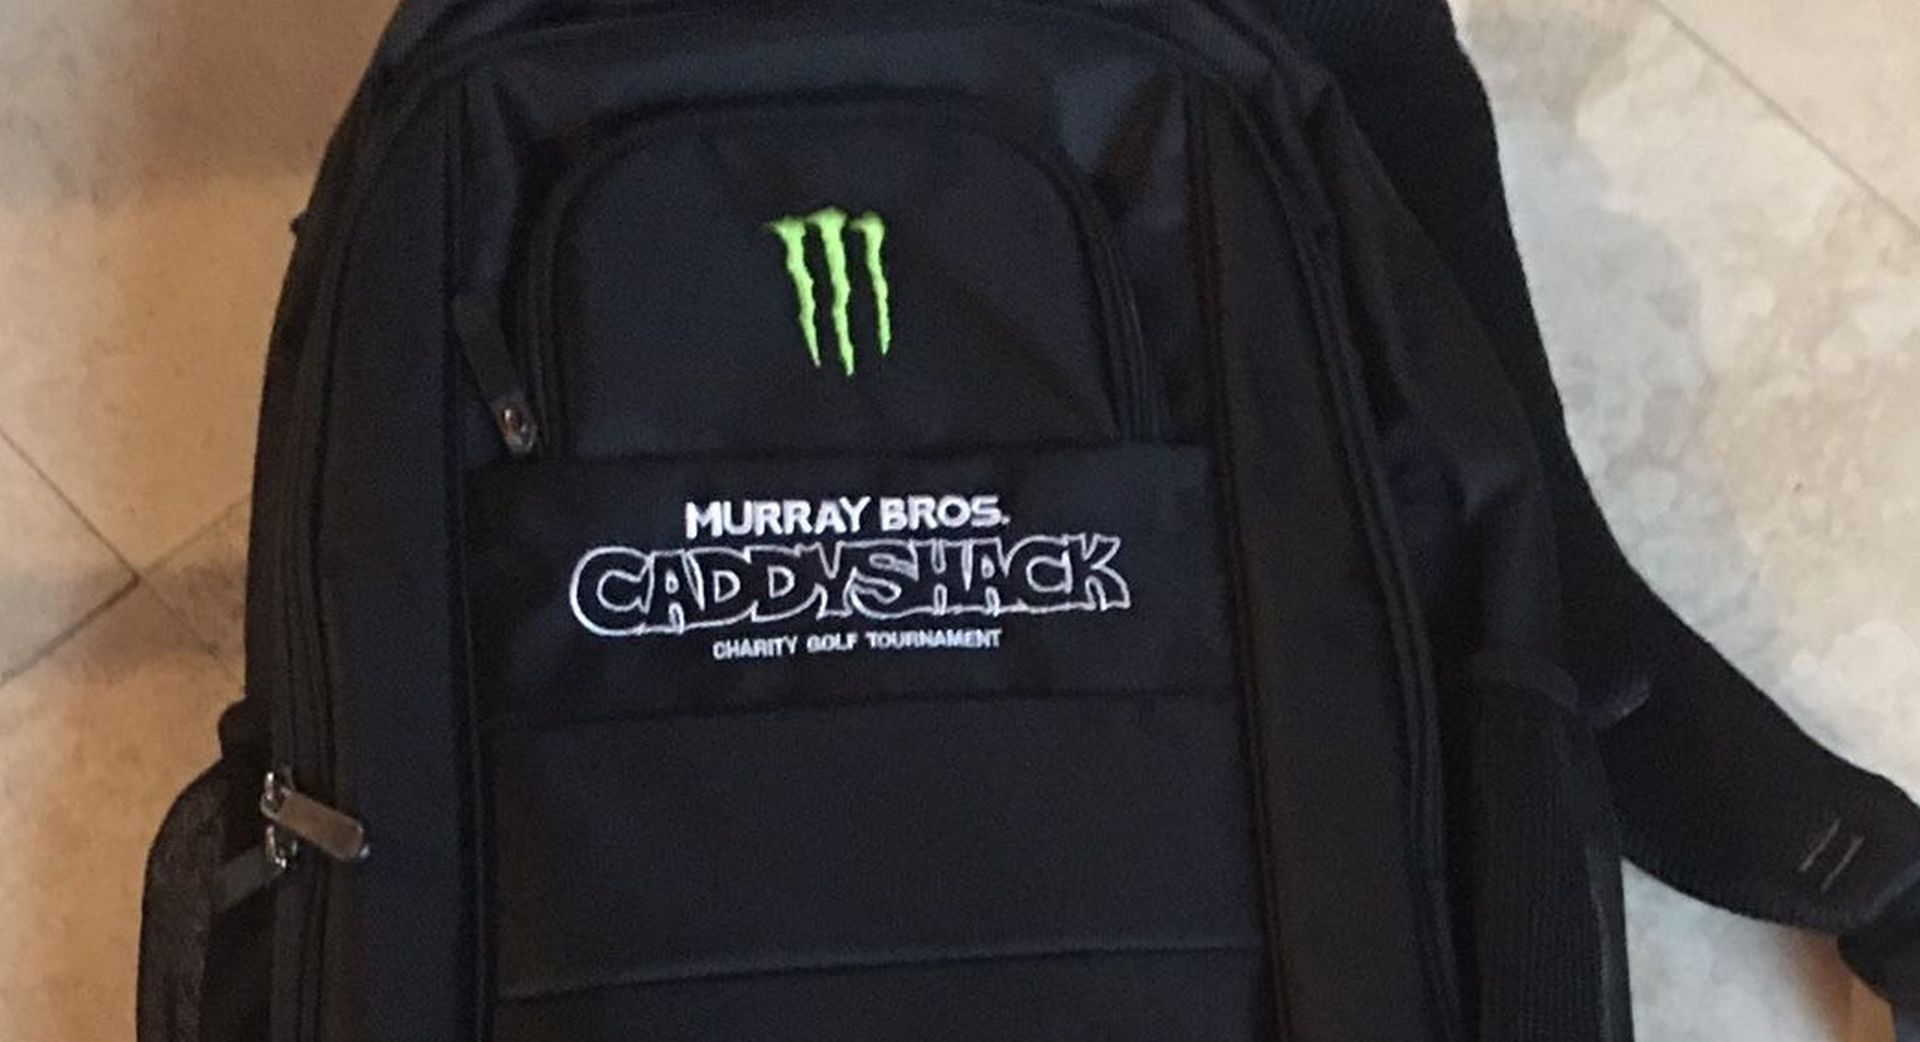 Monster Backpack (2 new) with tags selling as one lot